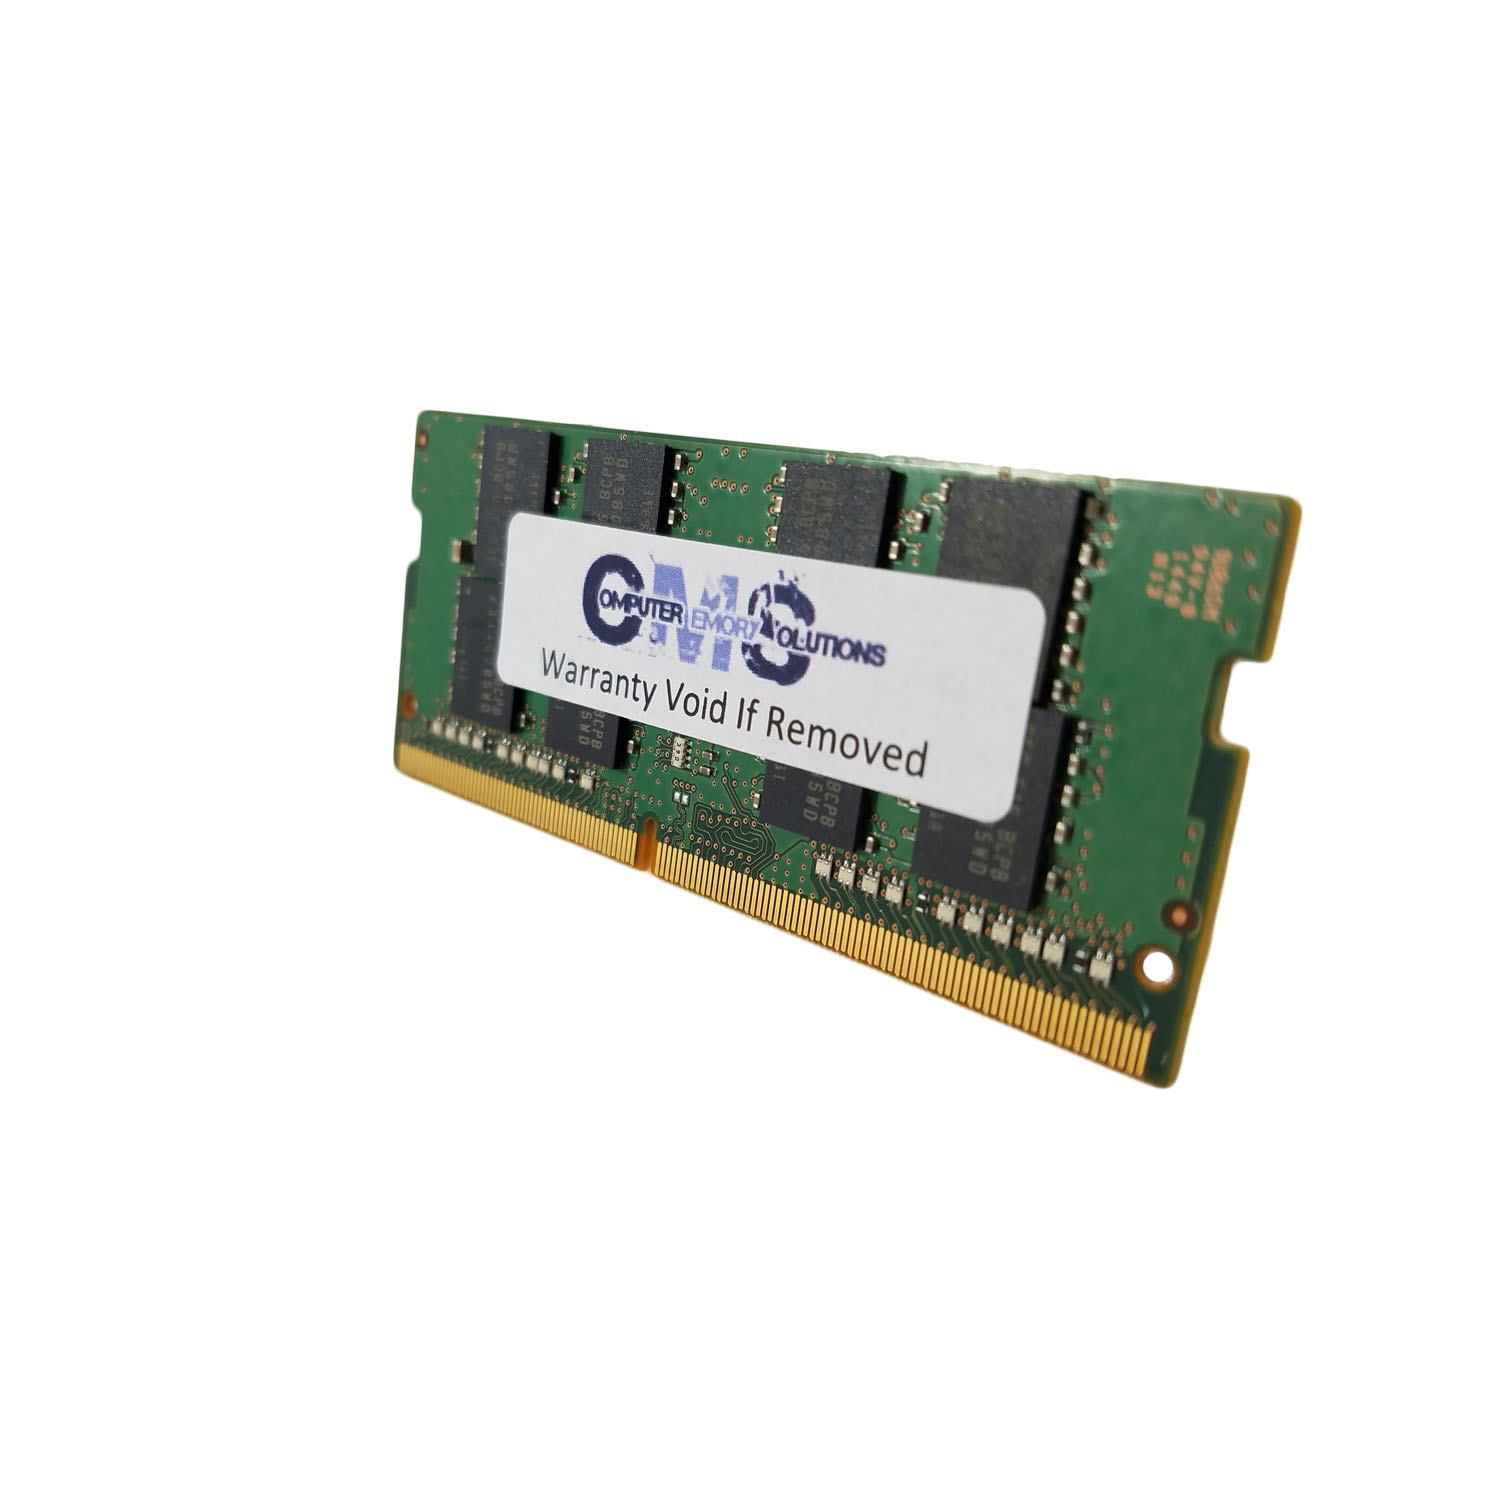 SP513-52N-85LZ SP513-52N-85DC by CMS C105 Memory Ram Compatible with Acer Spin 5 SP513-52N-52PL 4GB 1X4GB 